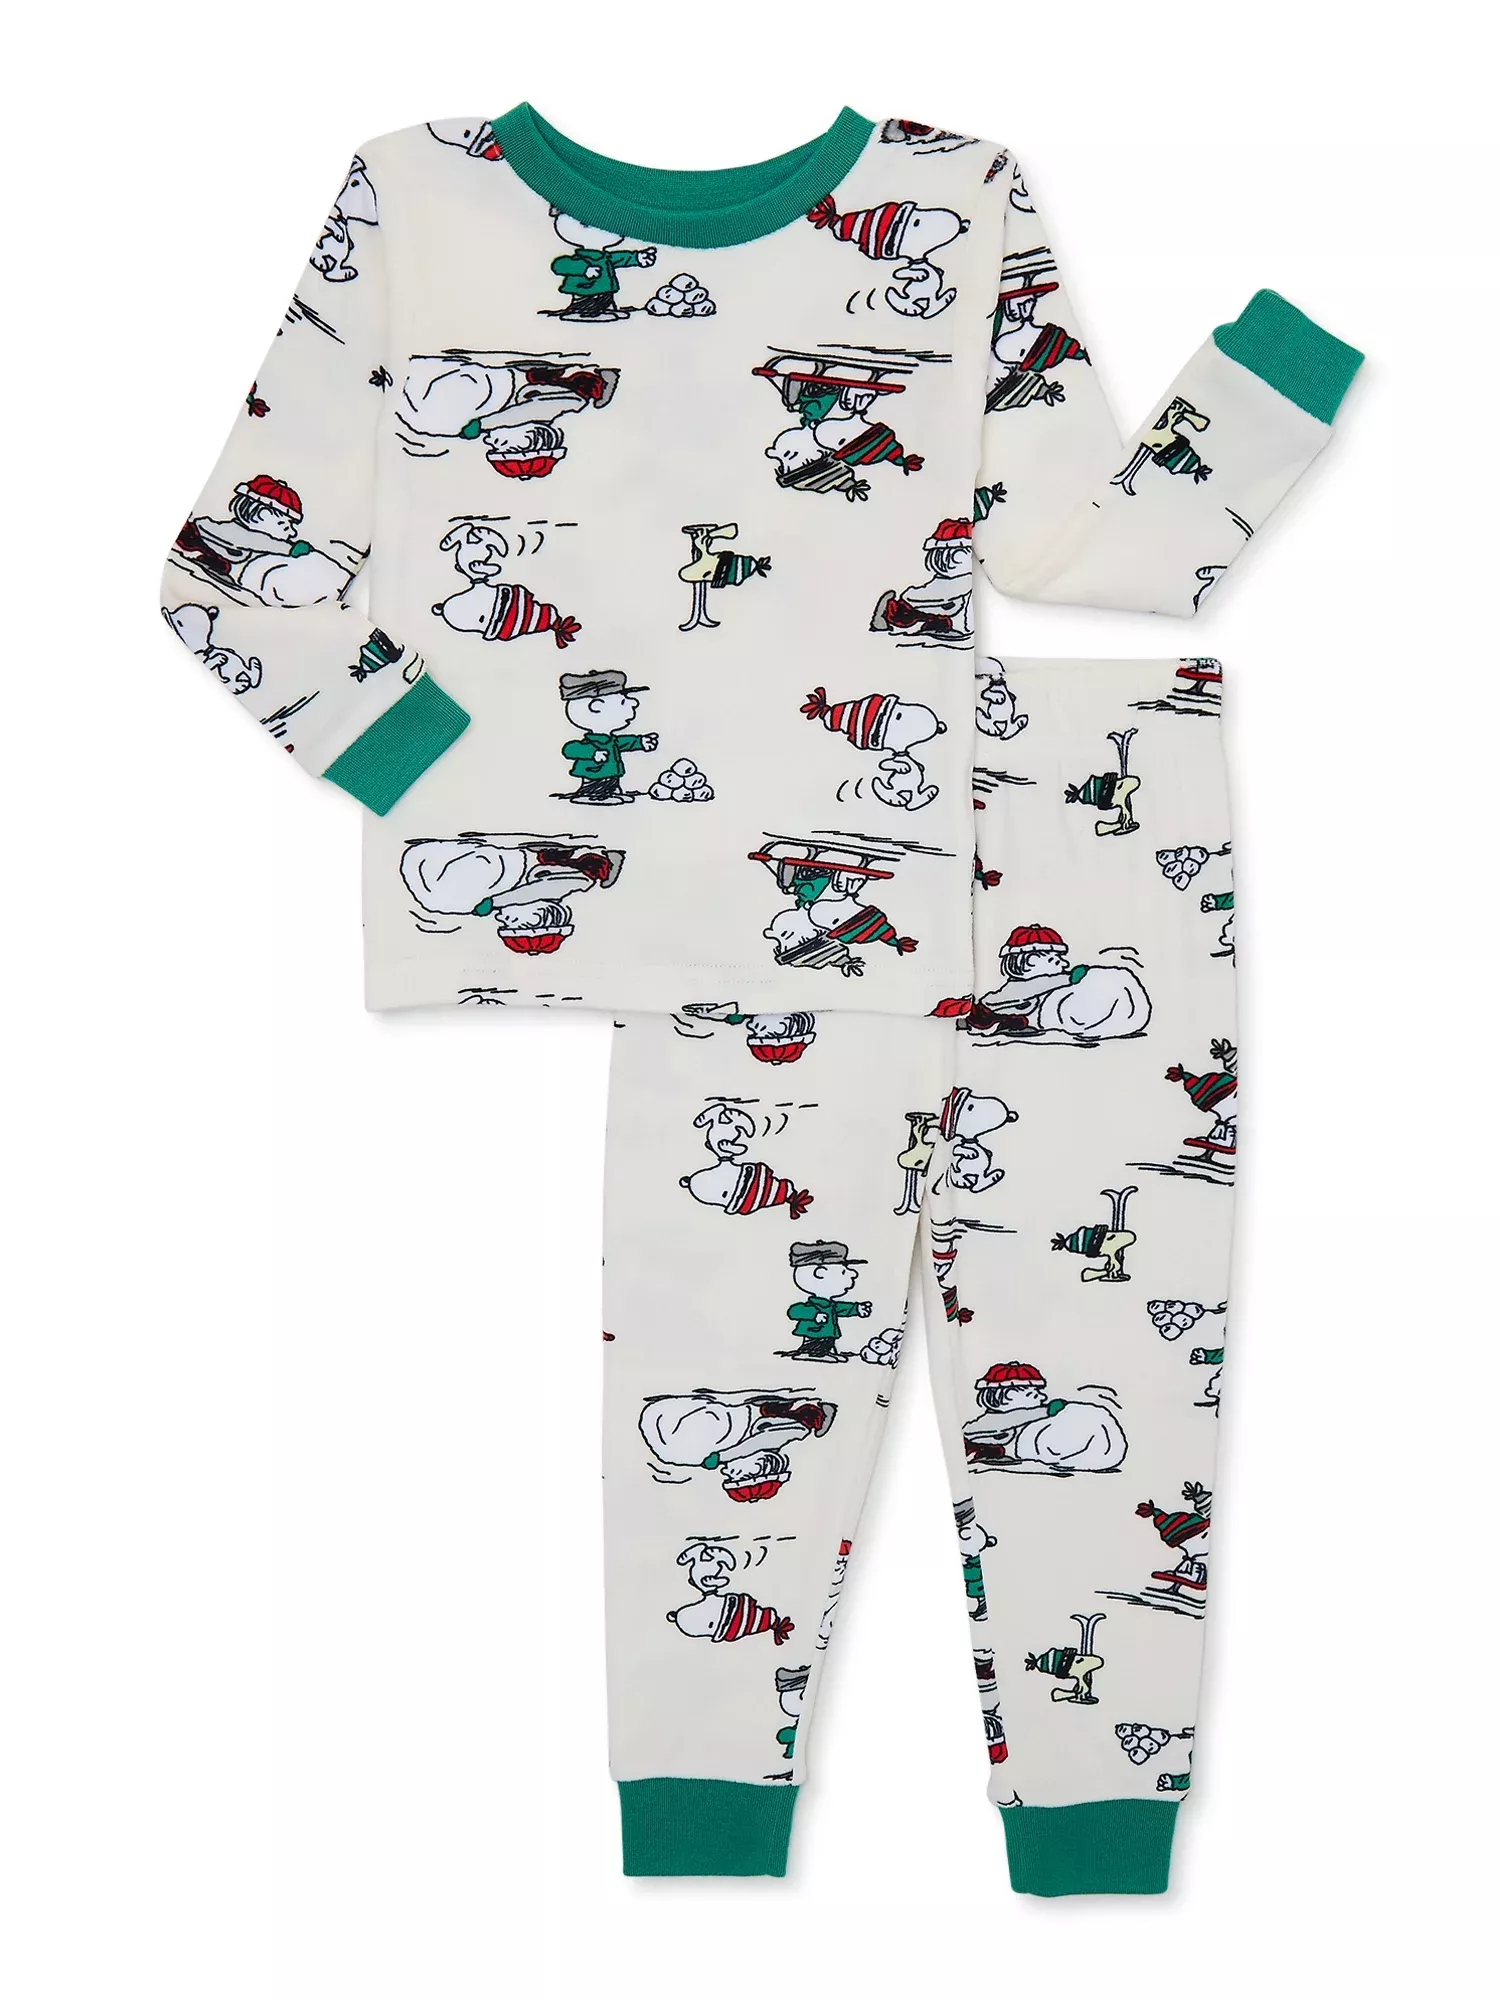 Peanuts Snoopy Halloween Toddler Boy and Girl Unisex Cotton Pajama Set,  2-Piece, Sizes 12M-5T 